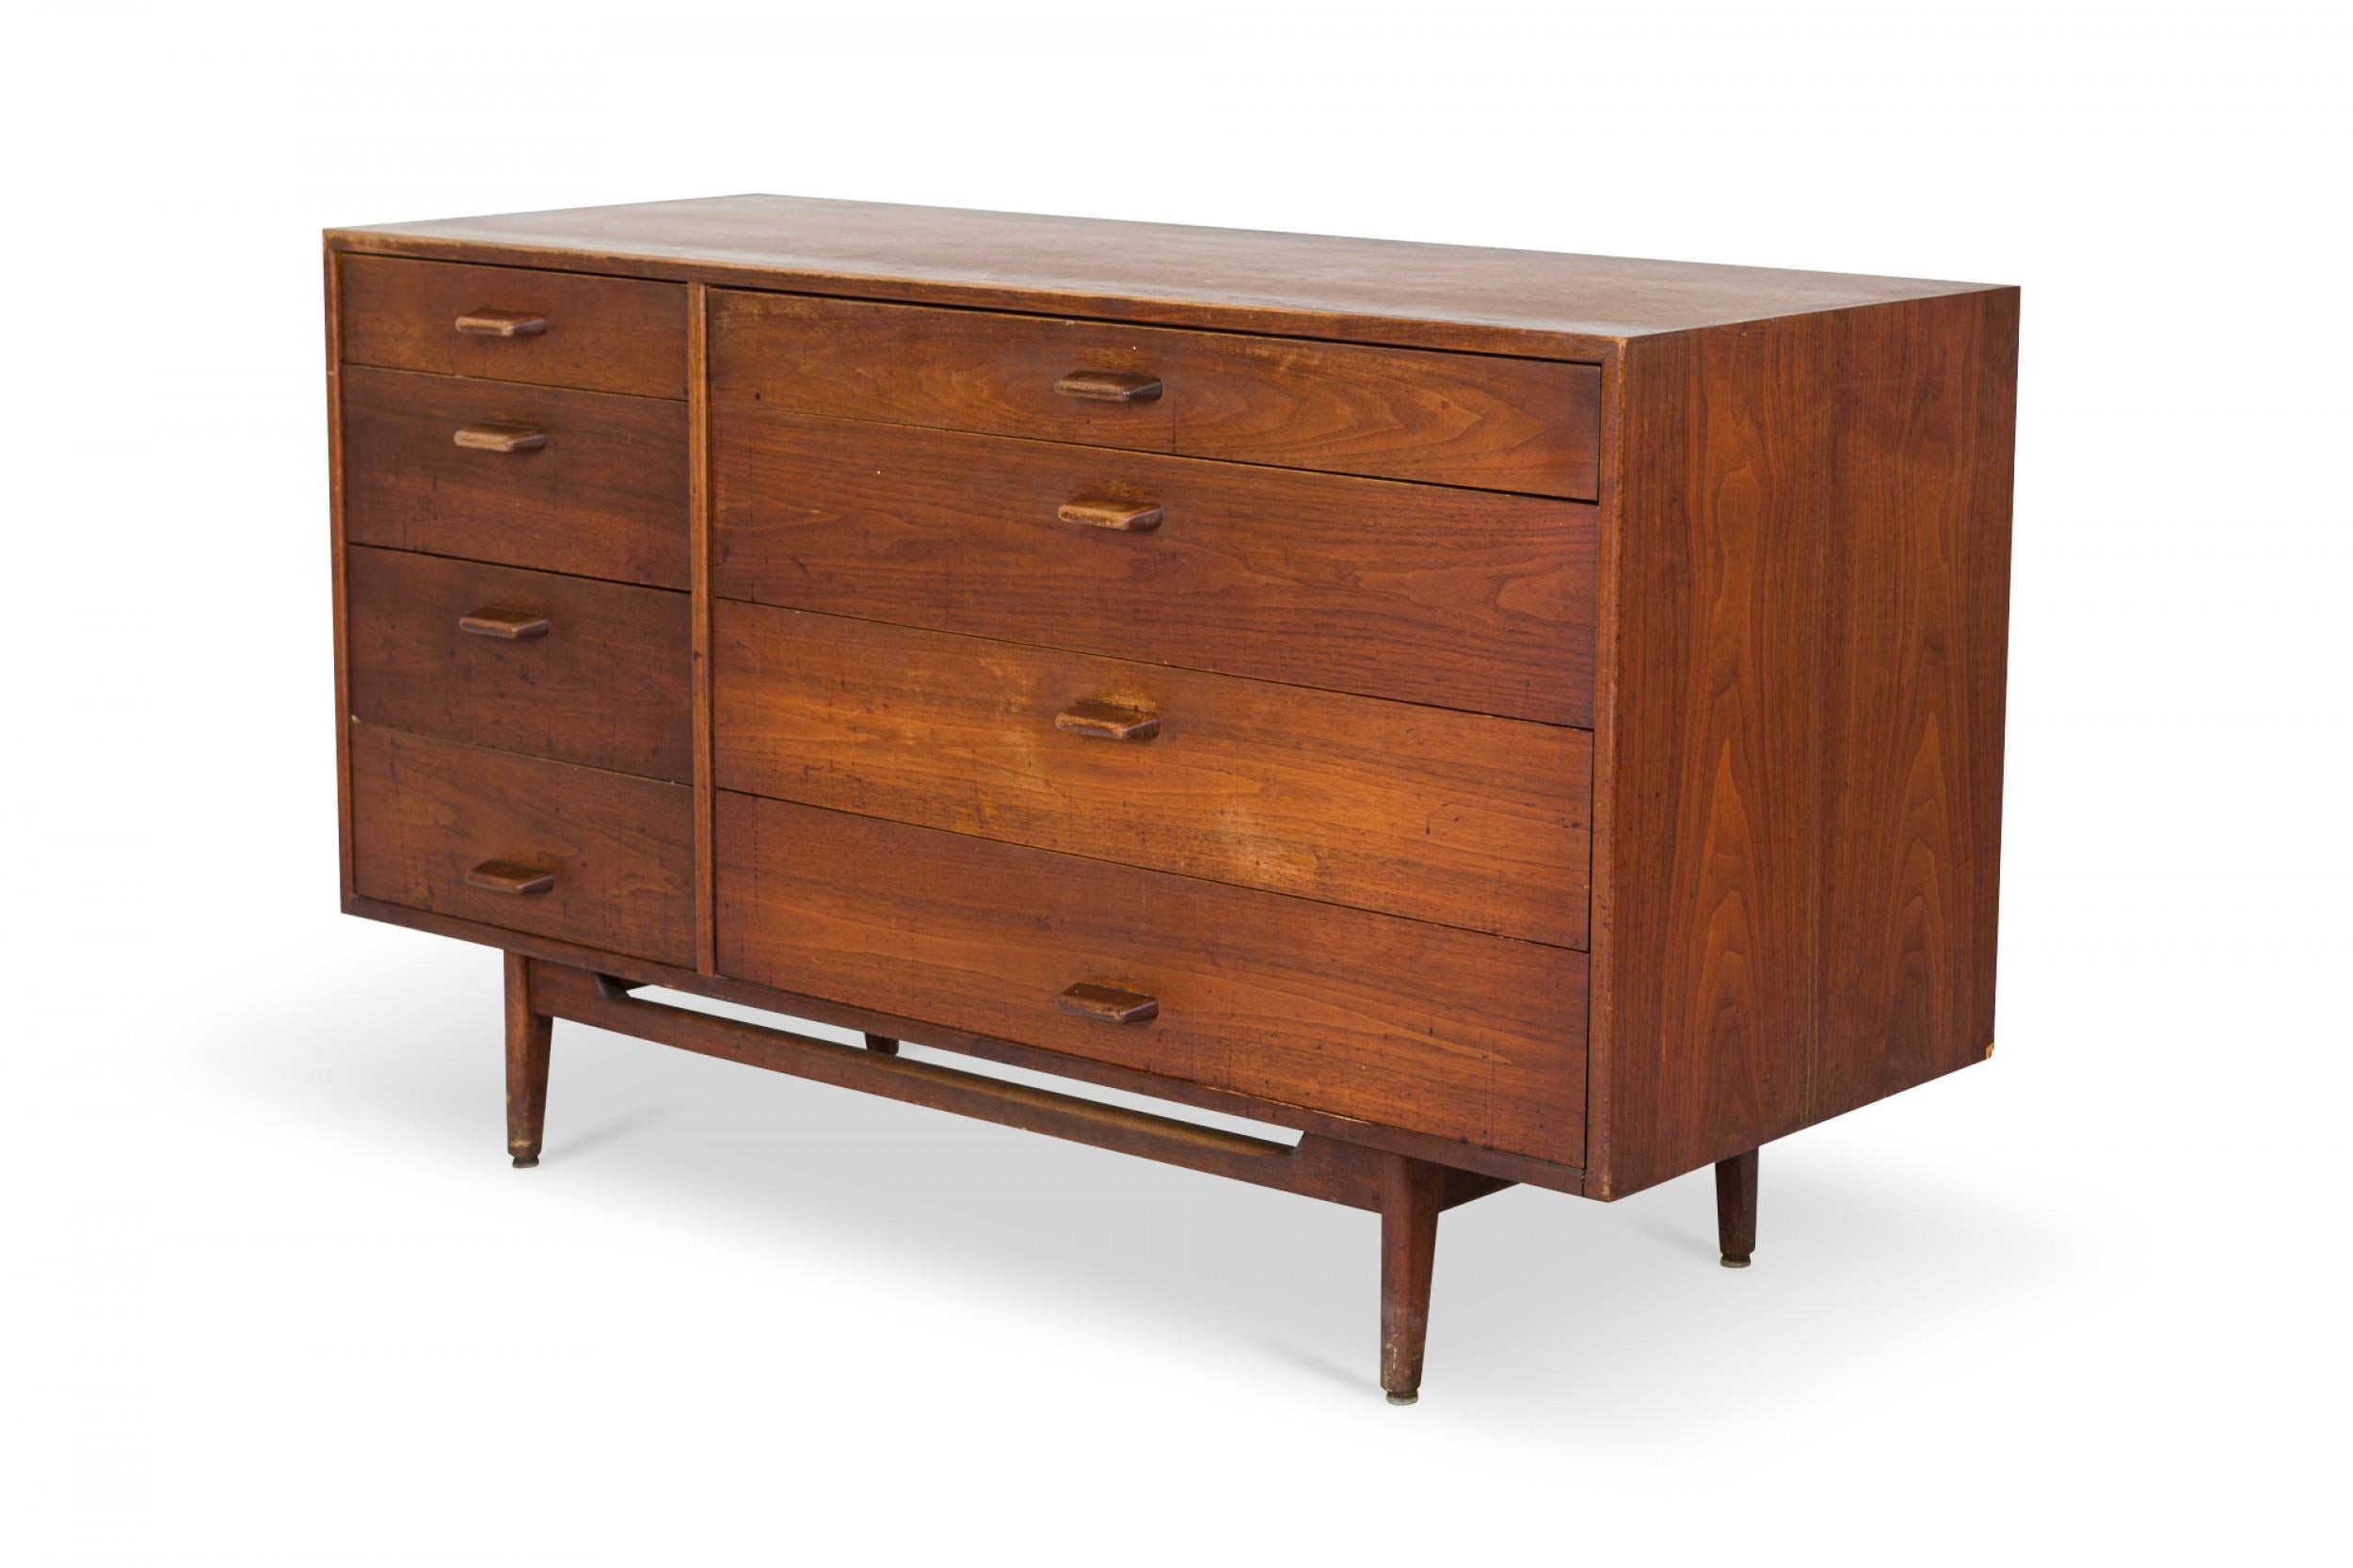 Danish Mid-Century walnut 8-drawer dresser with four narrow drawers on the left and four wider drawers on the right, the top of which folds down to create a writing desk, all with rounded rectangular wooden drawer pulls in a walnut cabinet, resting